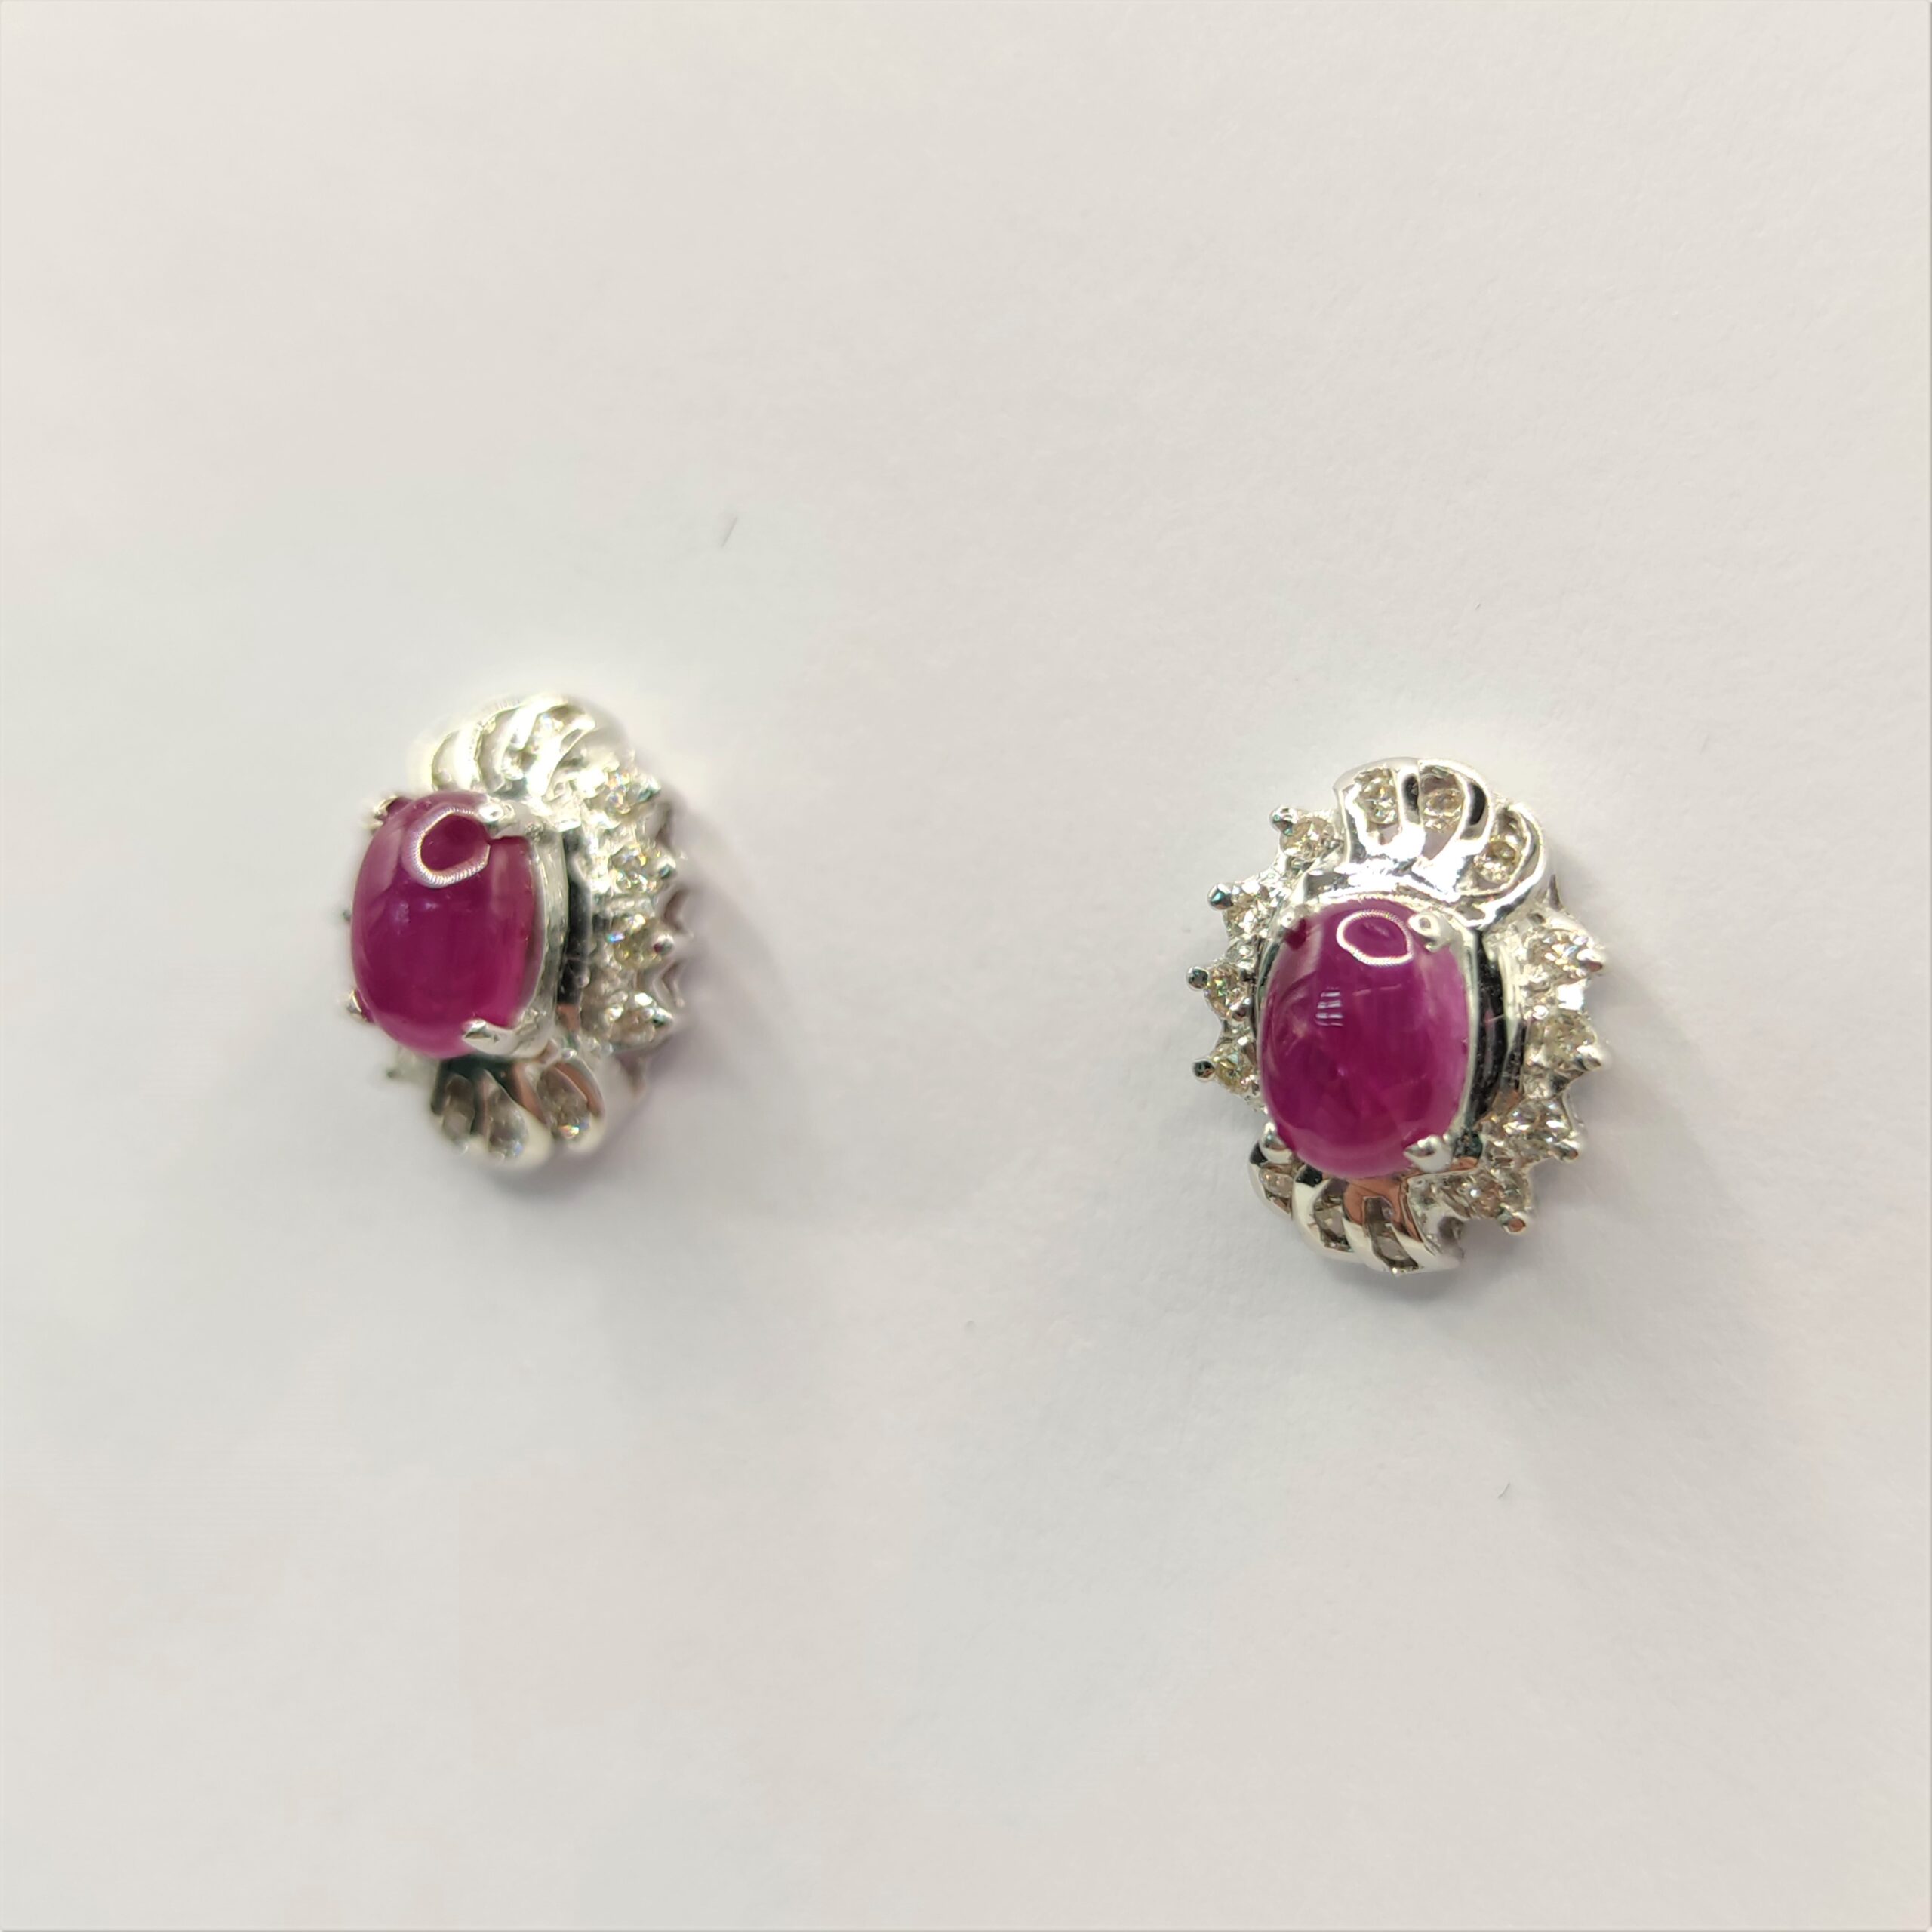 Sold at Auction: 18Kt Cabochon Ruby & Diamond Flower Earrings